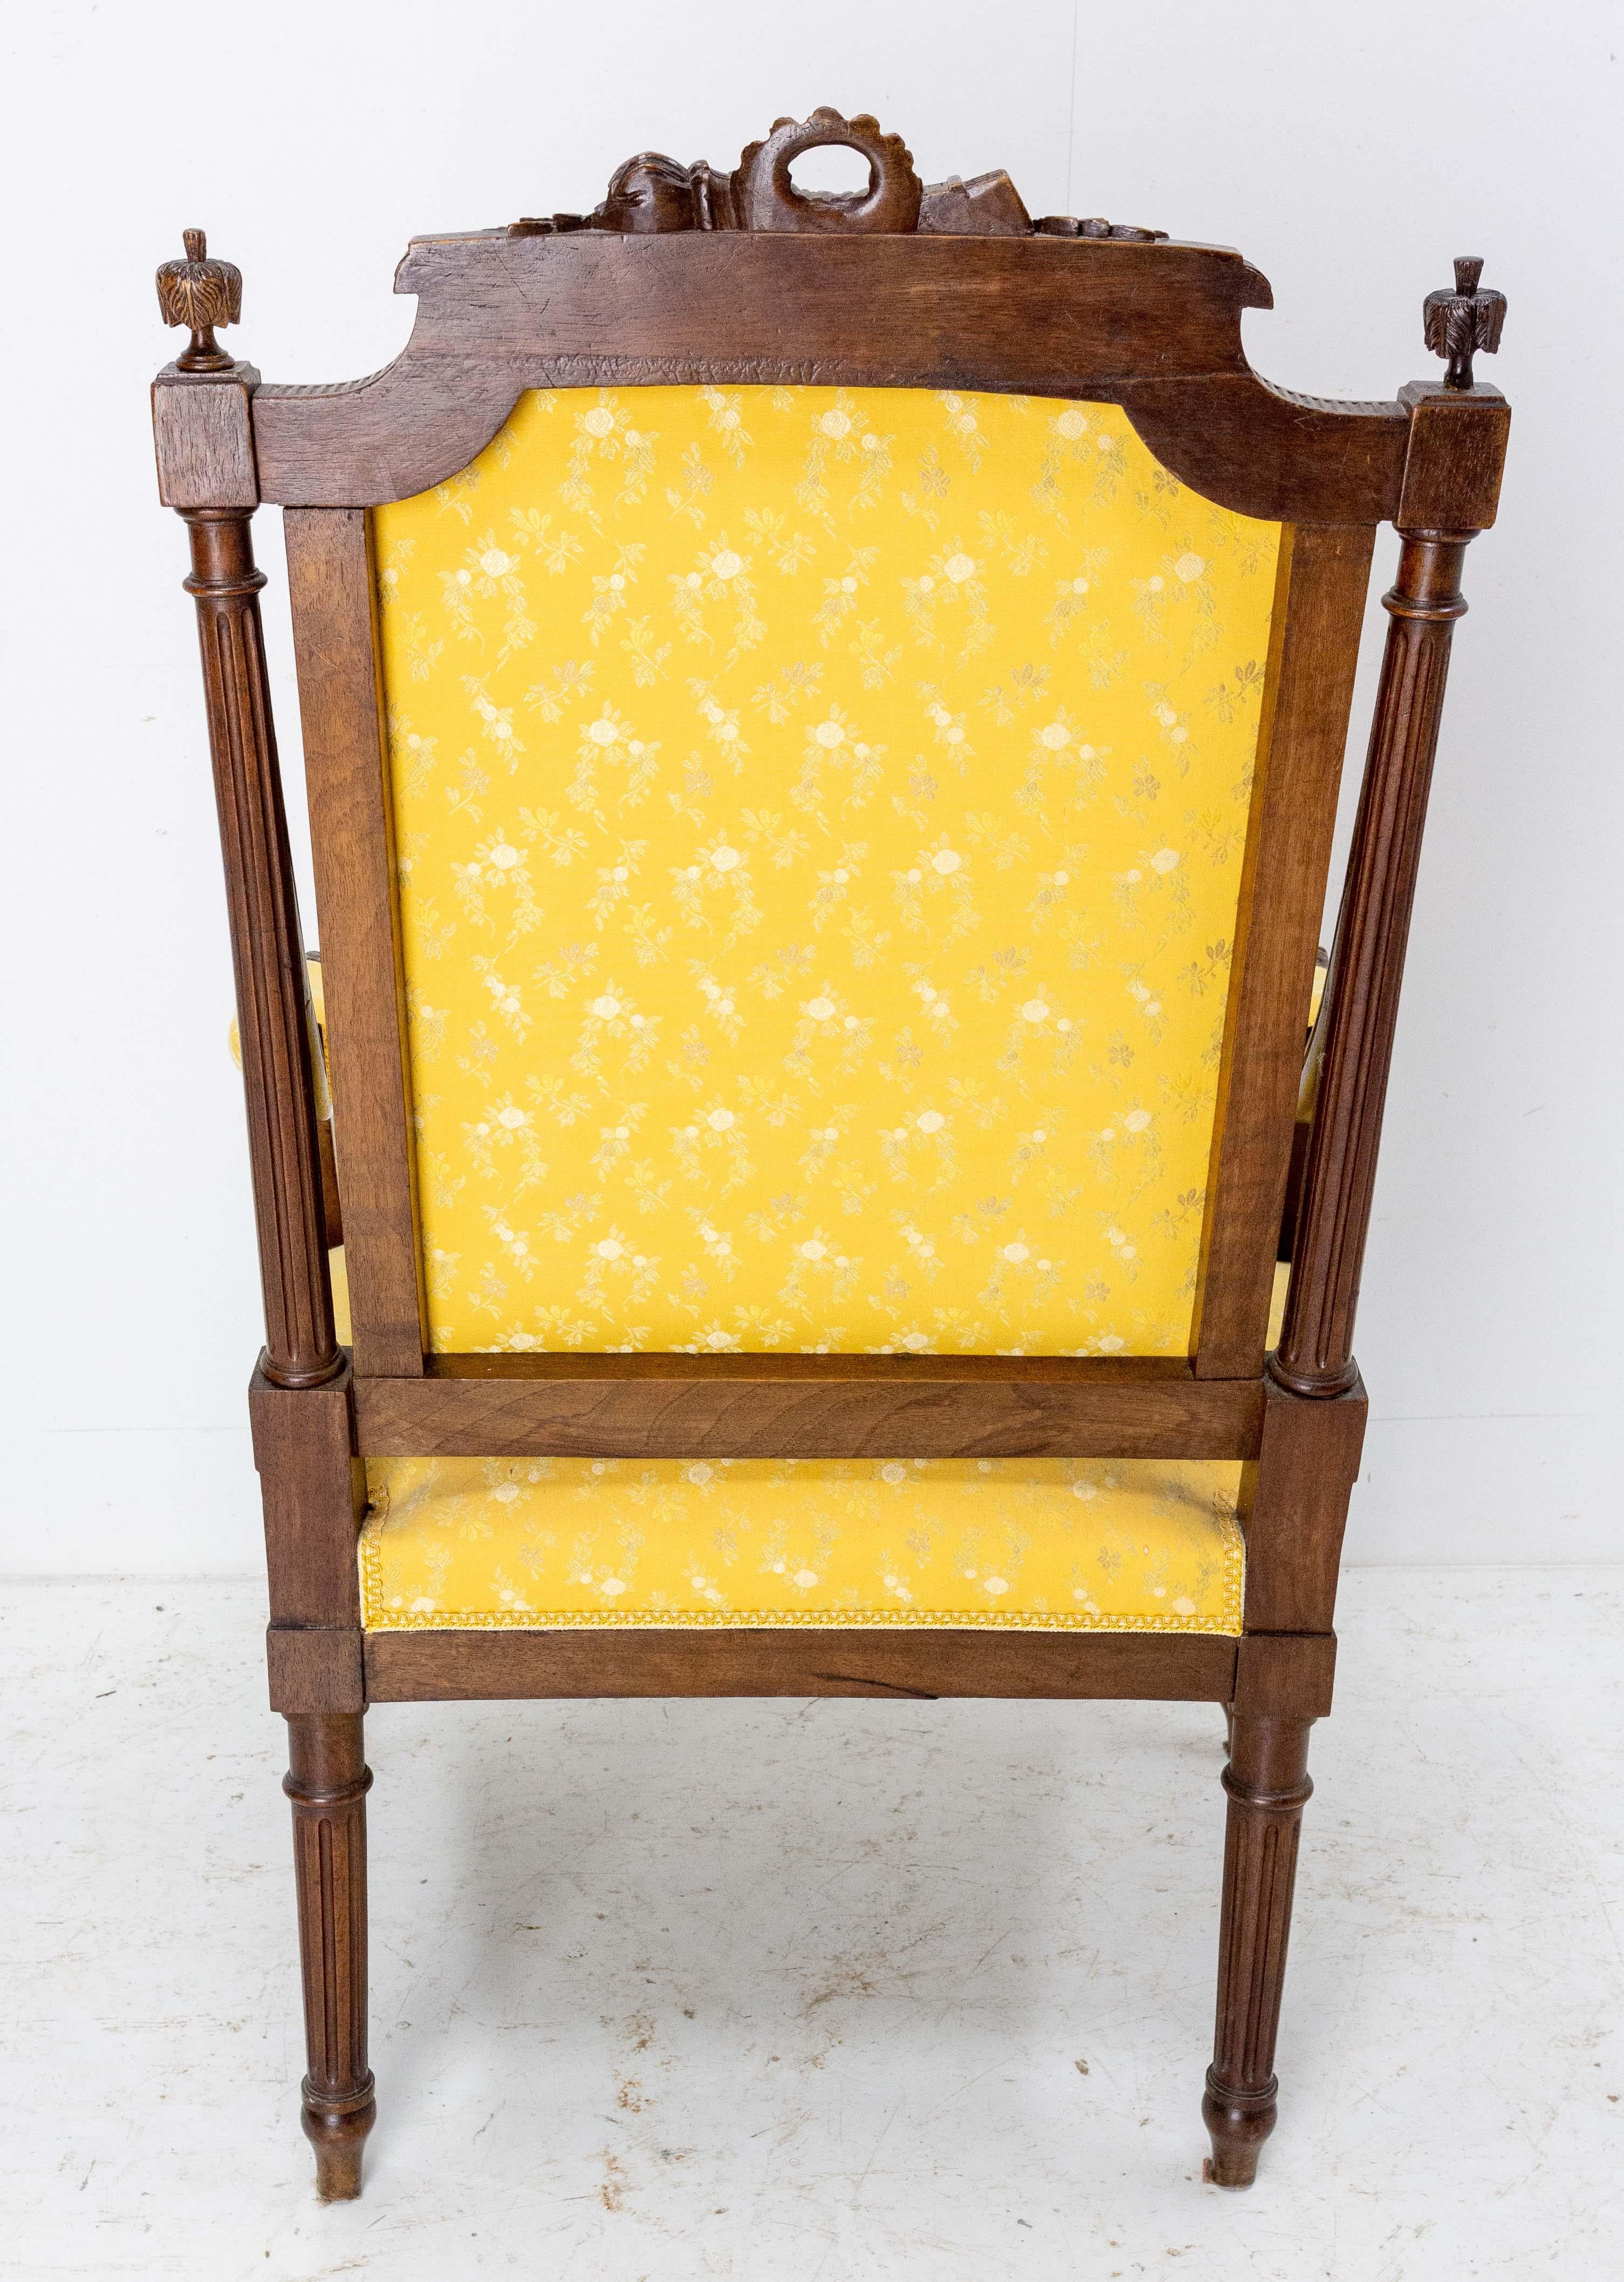 Walnut Fauteuil Louis XVI Revival Armchair French, Late 19th Century to Recover For Sale 2